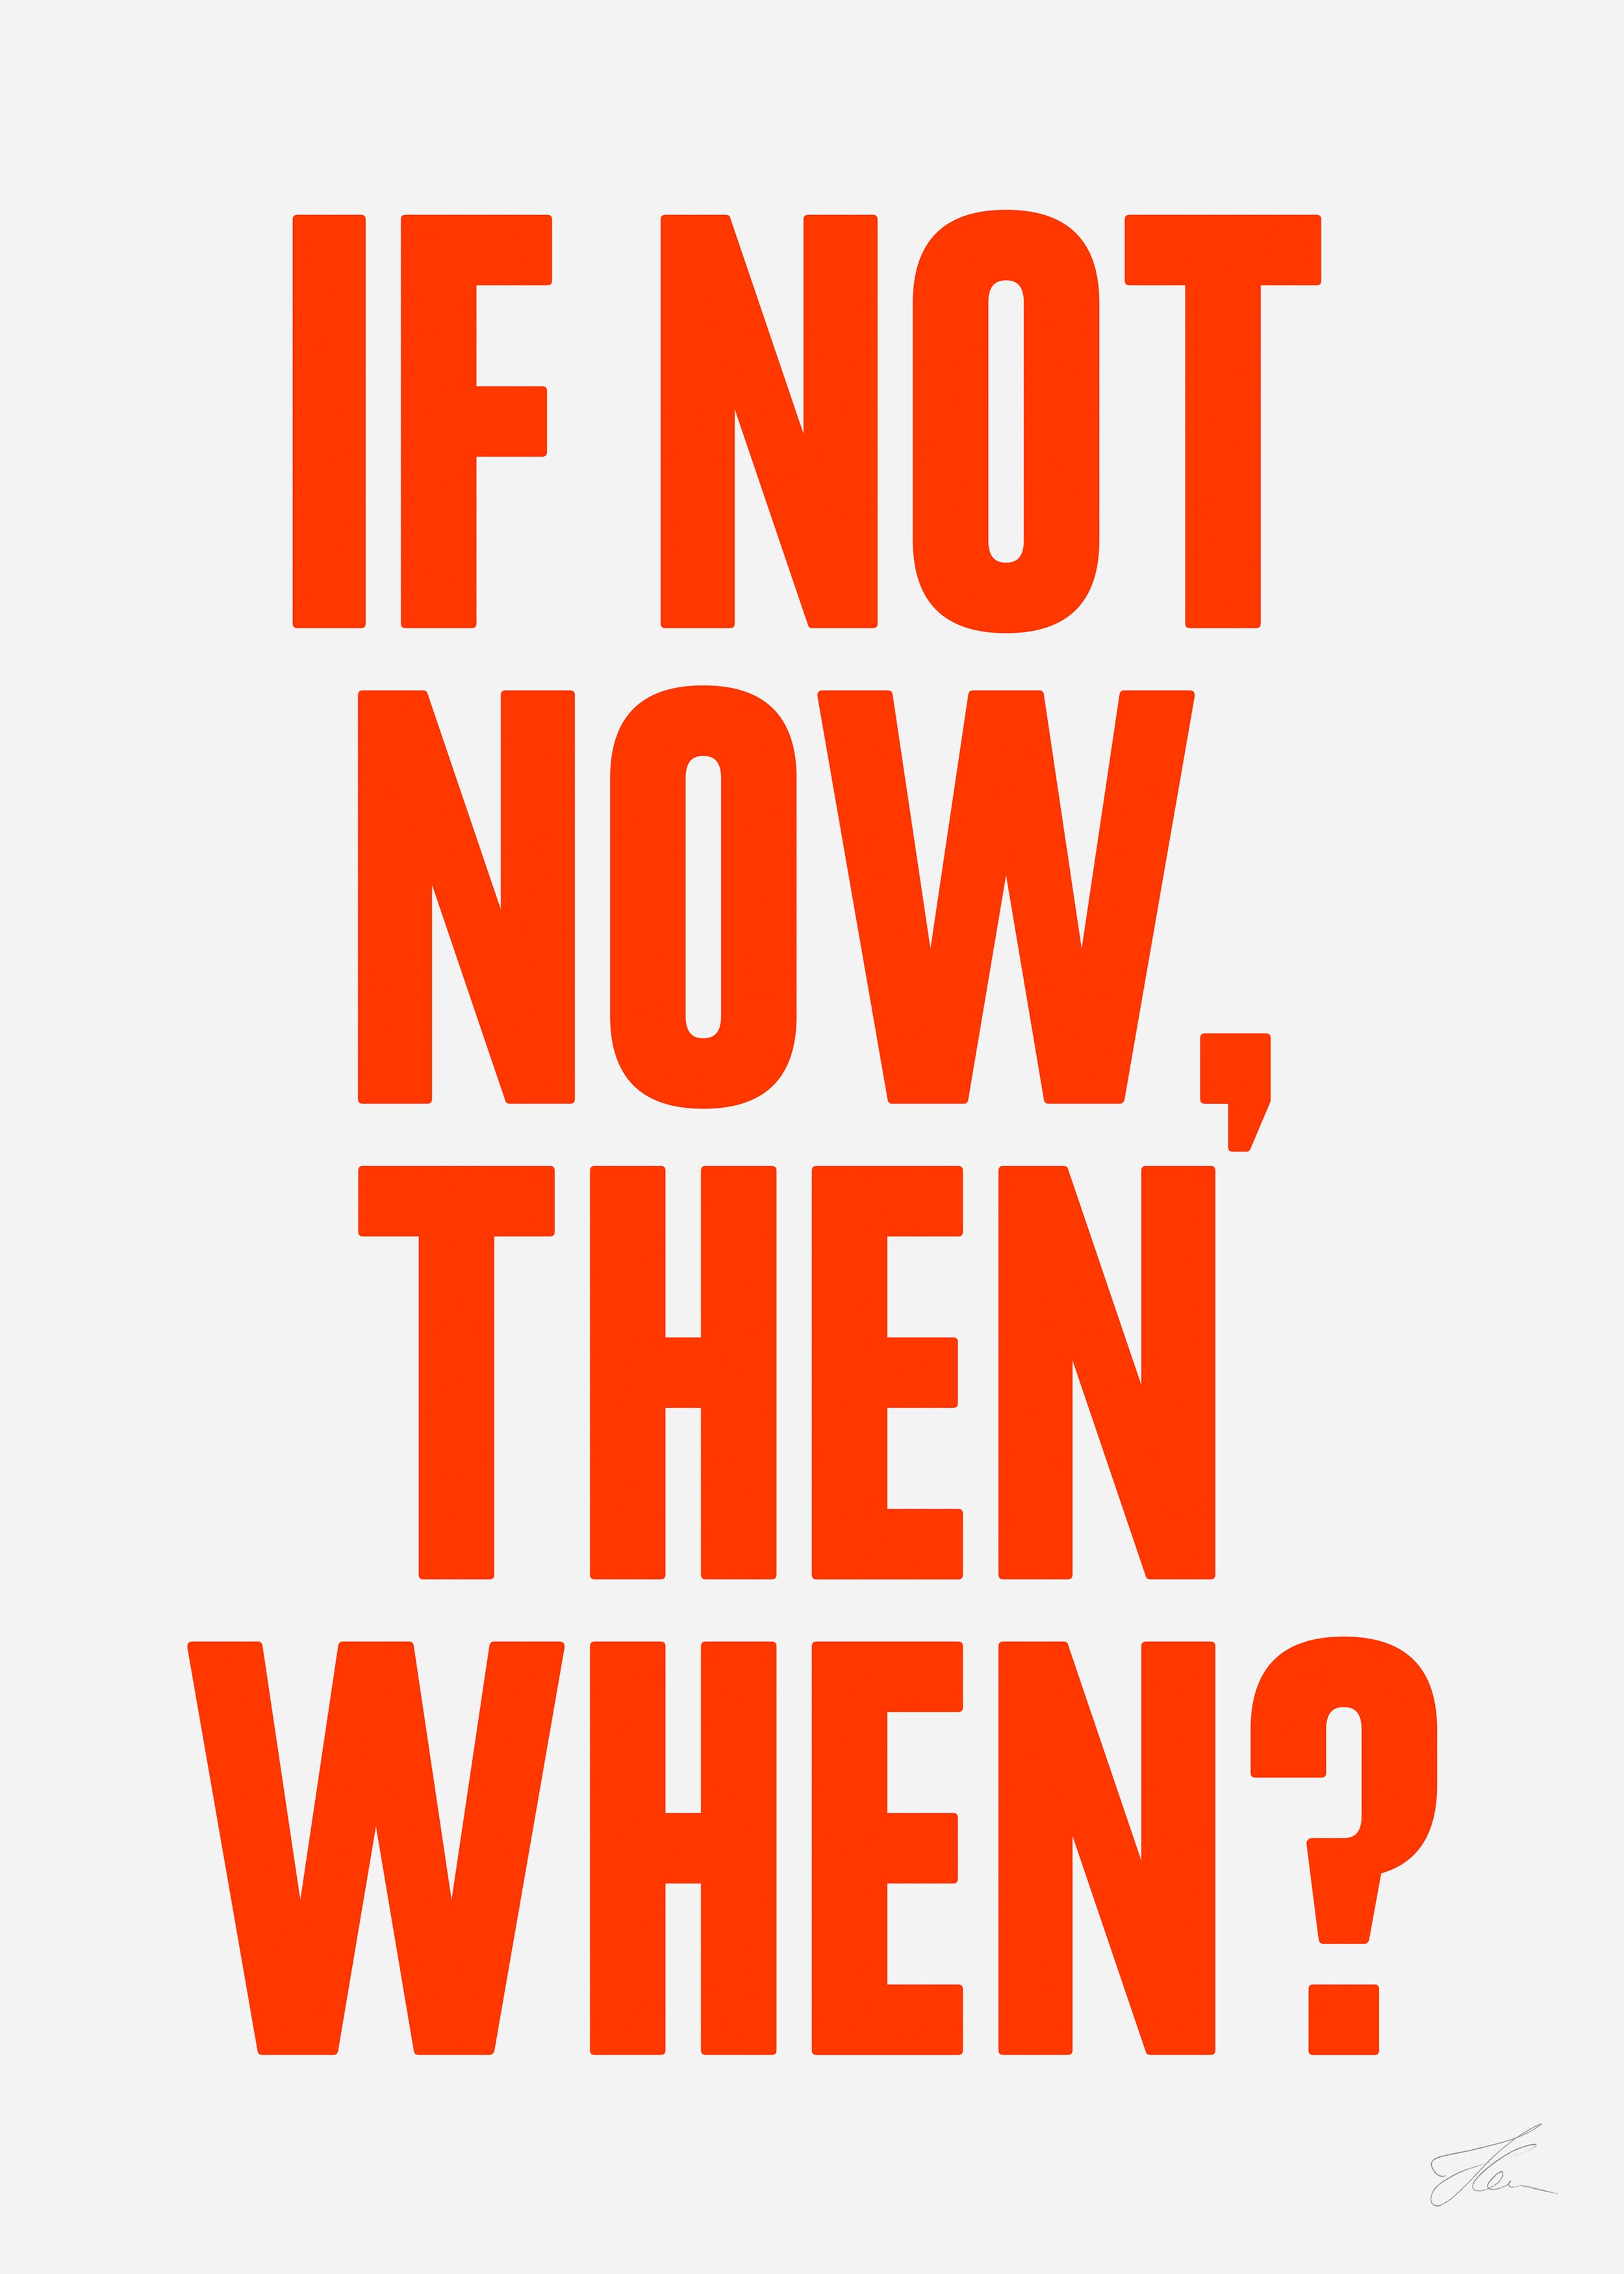 If not now, then when?